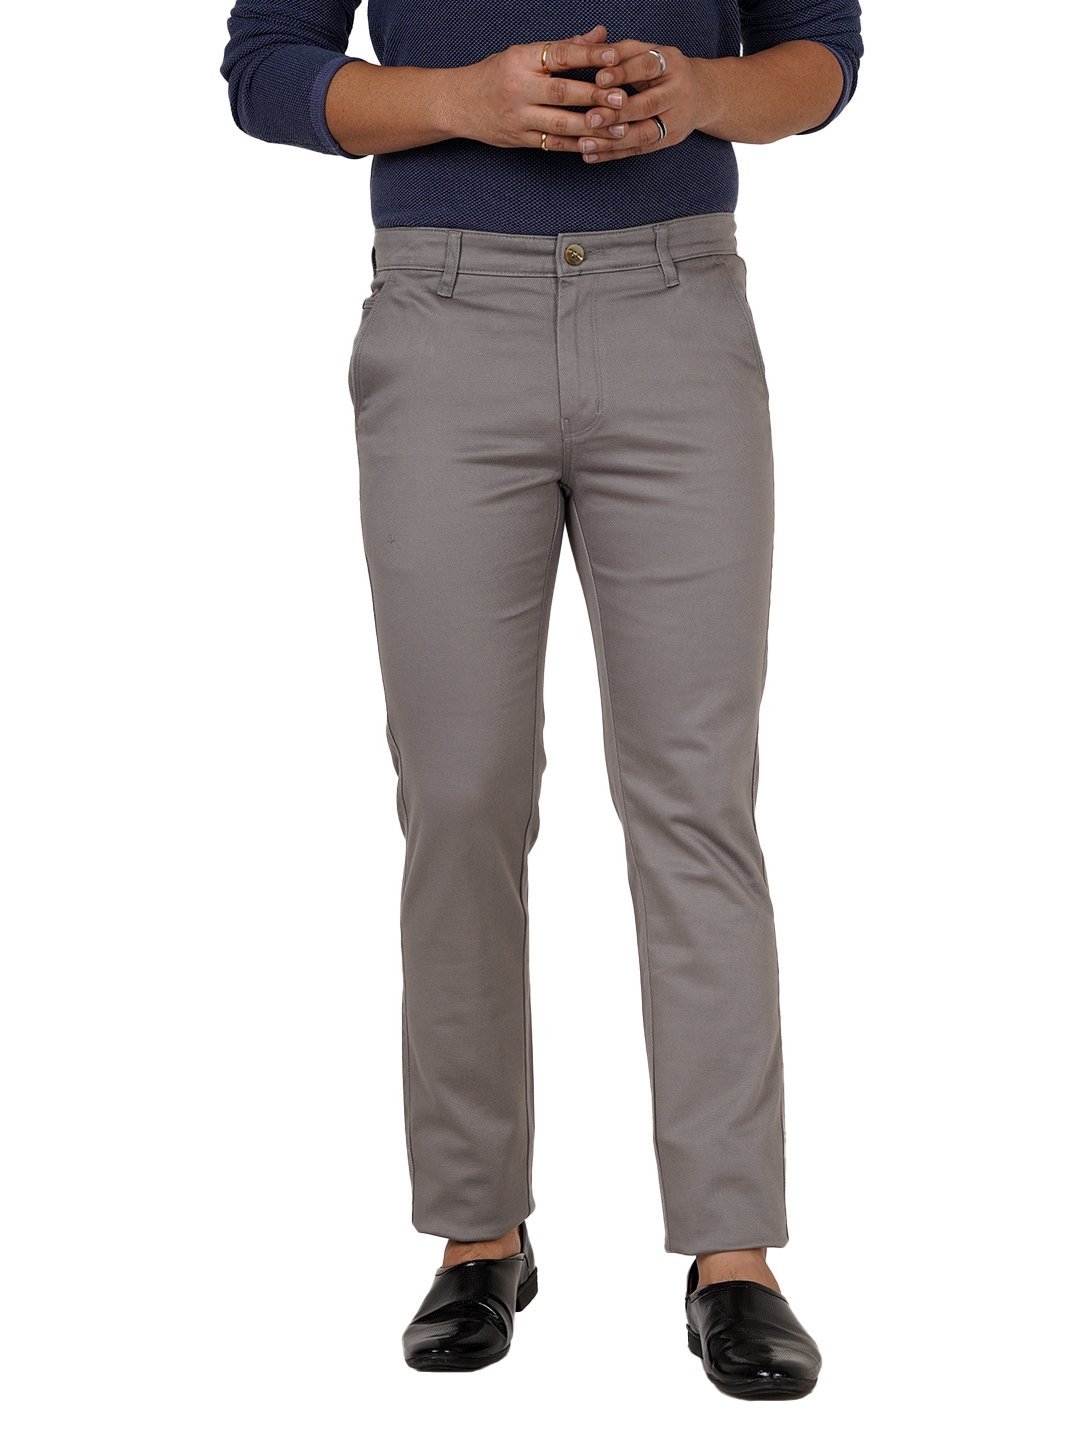 D'cot by Donear Men's Grey Cotton Trousers